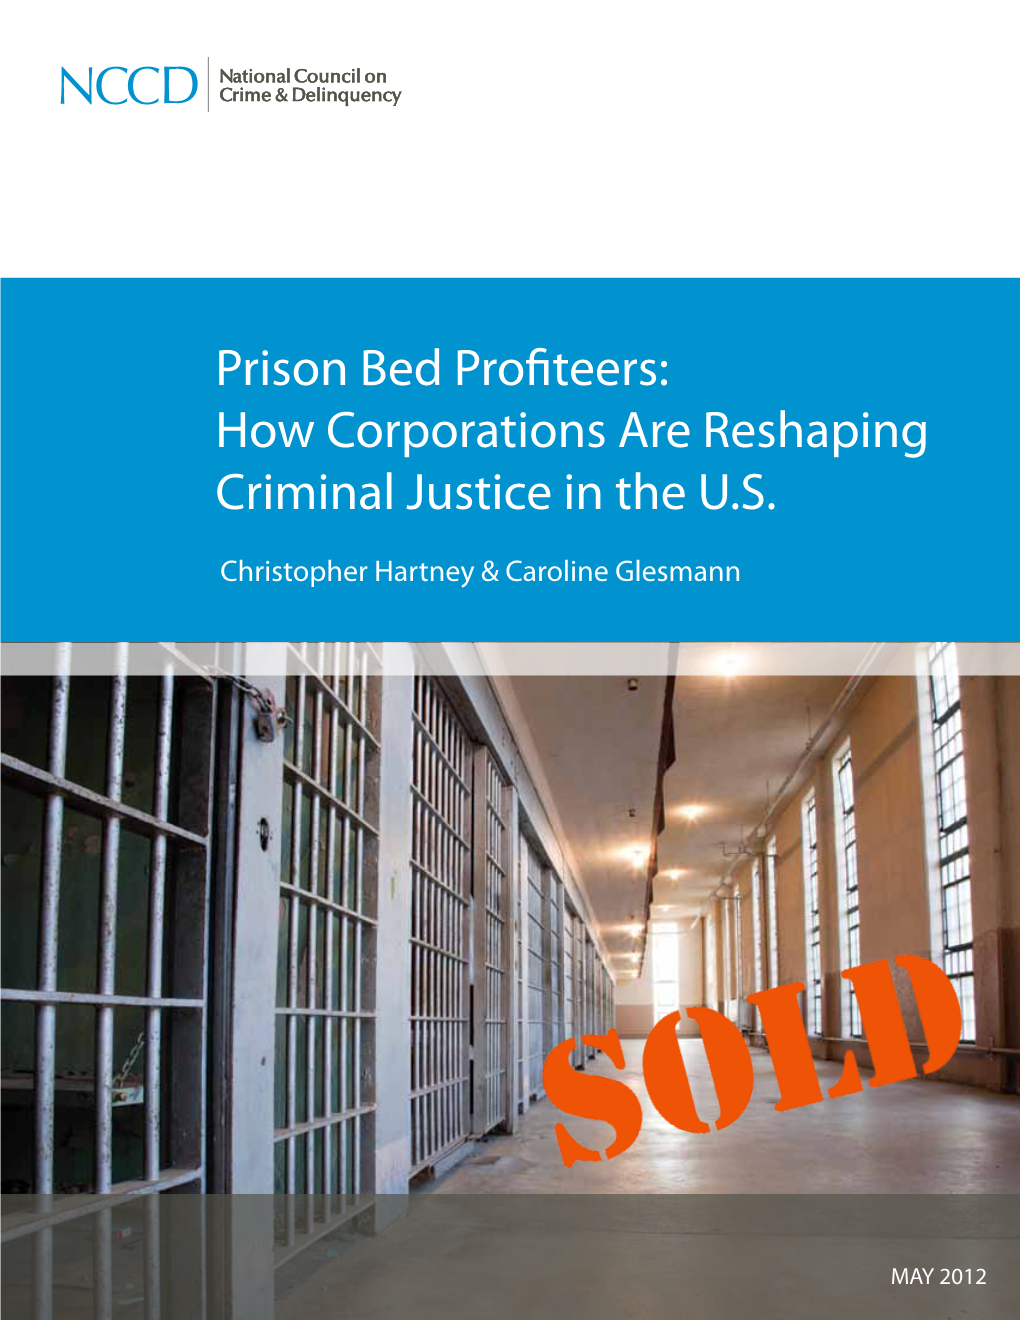 Prison Bed Profiteers: How Corporations Are Reshaping Criminal Justice in the U.S